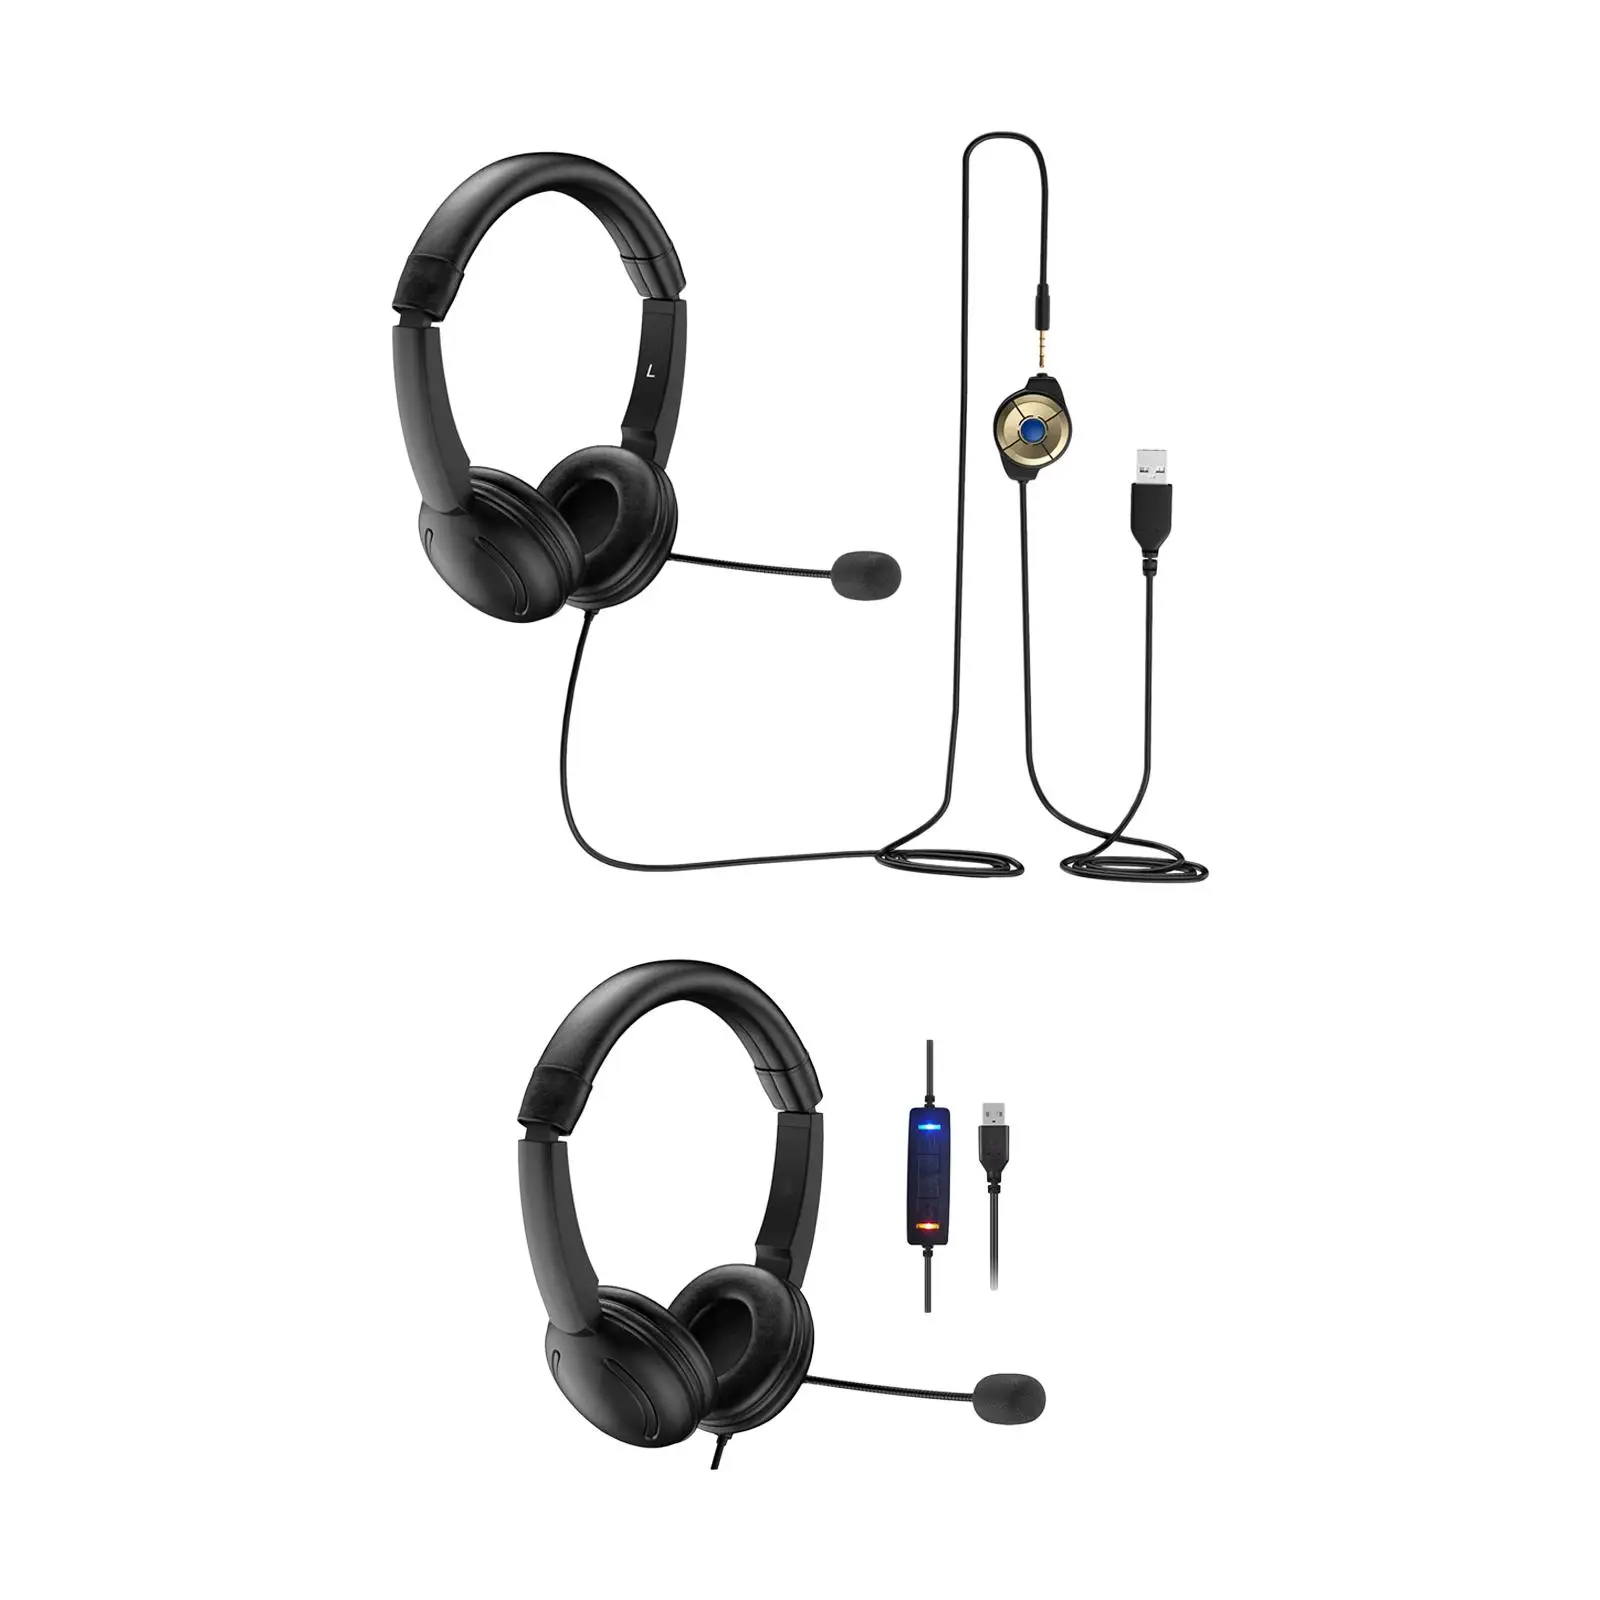 USB Headset with Microphone Volume Control Lightweight with in Line Controls Mic Headphones for Home Office Laptop Gaming Music